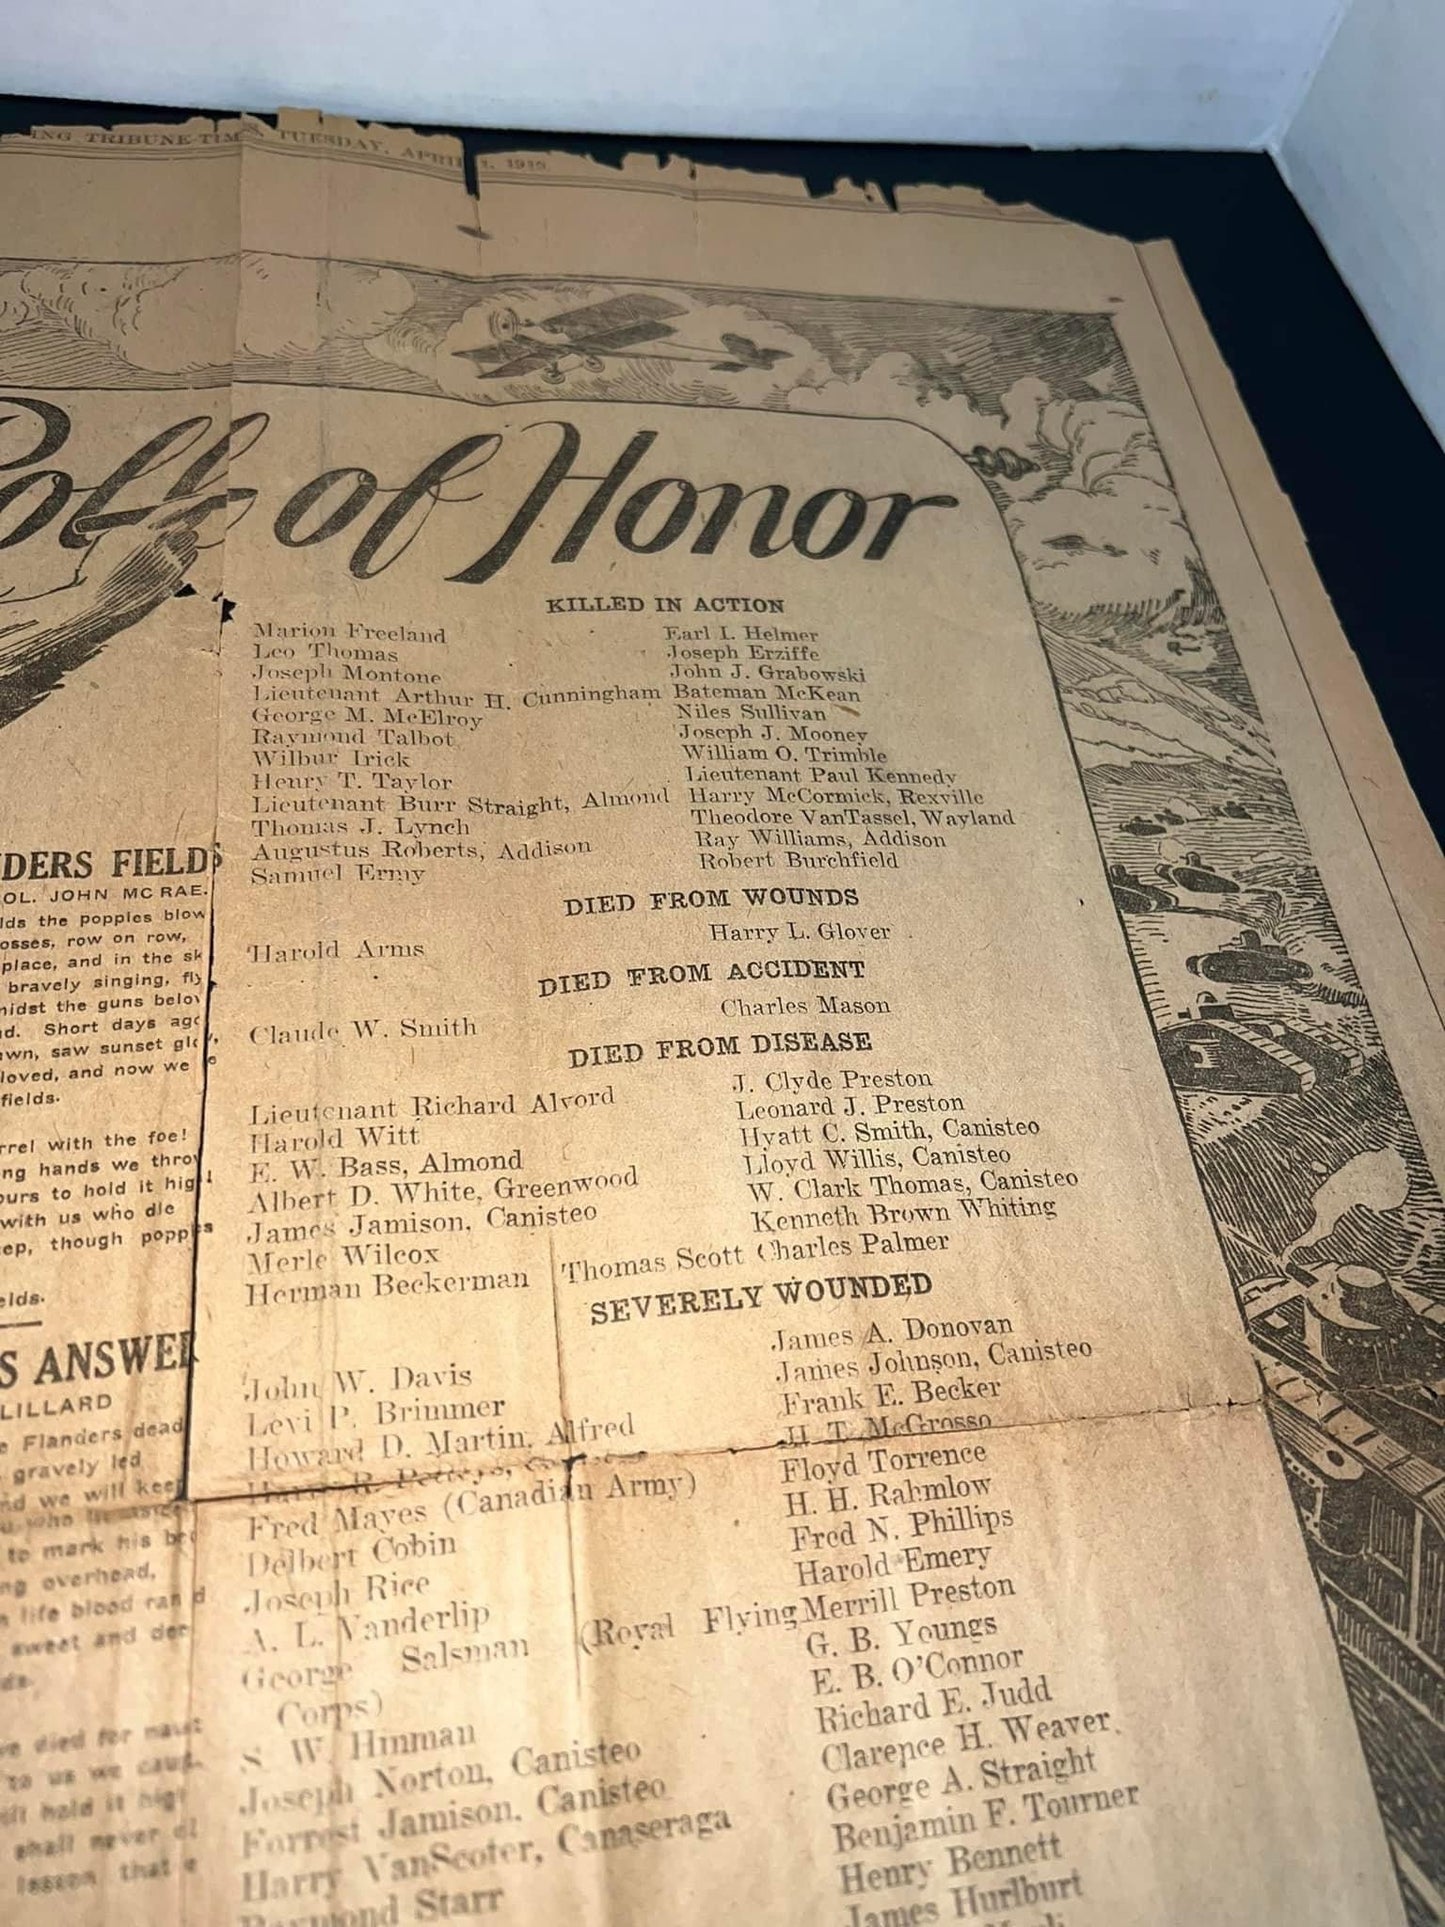 Antique Ww1 roll of honor 1919 evening tribune In Flanders field - killed in action